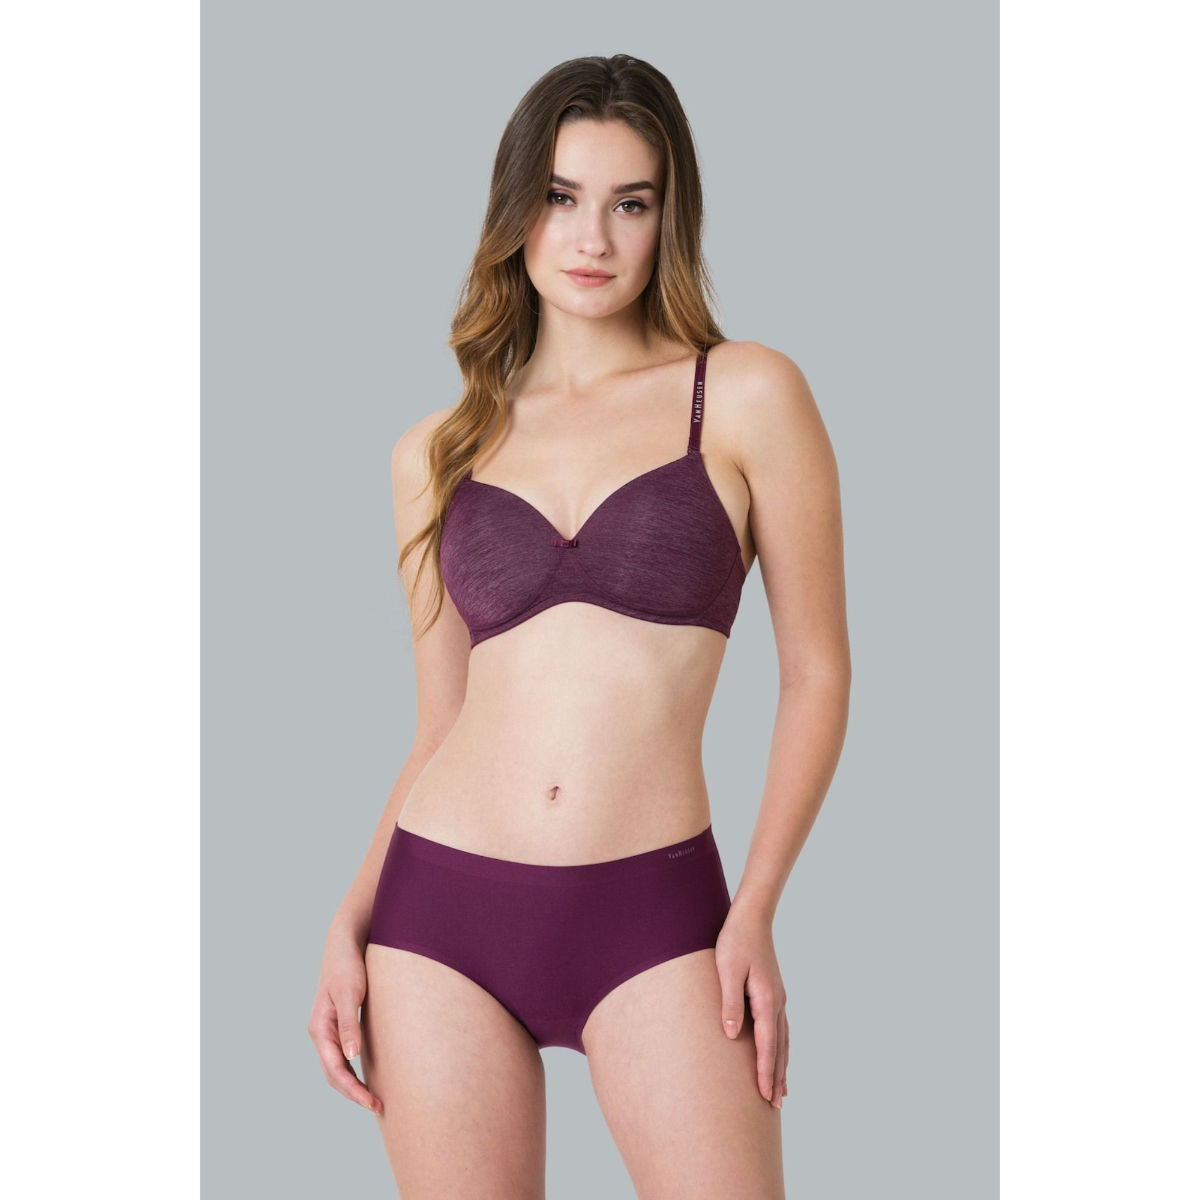 Van Heusen Intimates Panty, Women InvisiLite Hipster Panty - No Visible  Panty Line and Quick Dry for Women at Vanheusenintimates